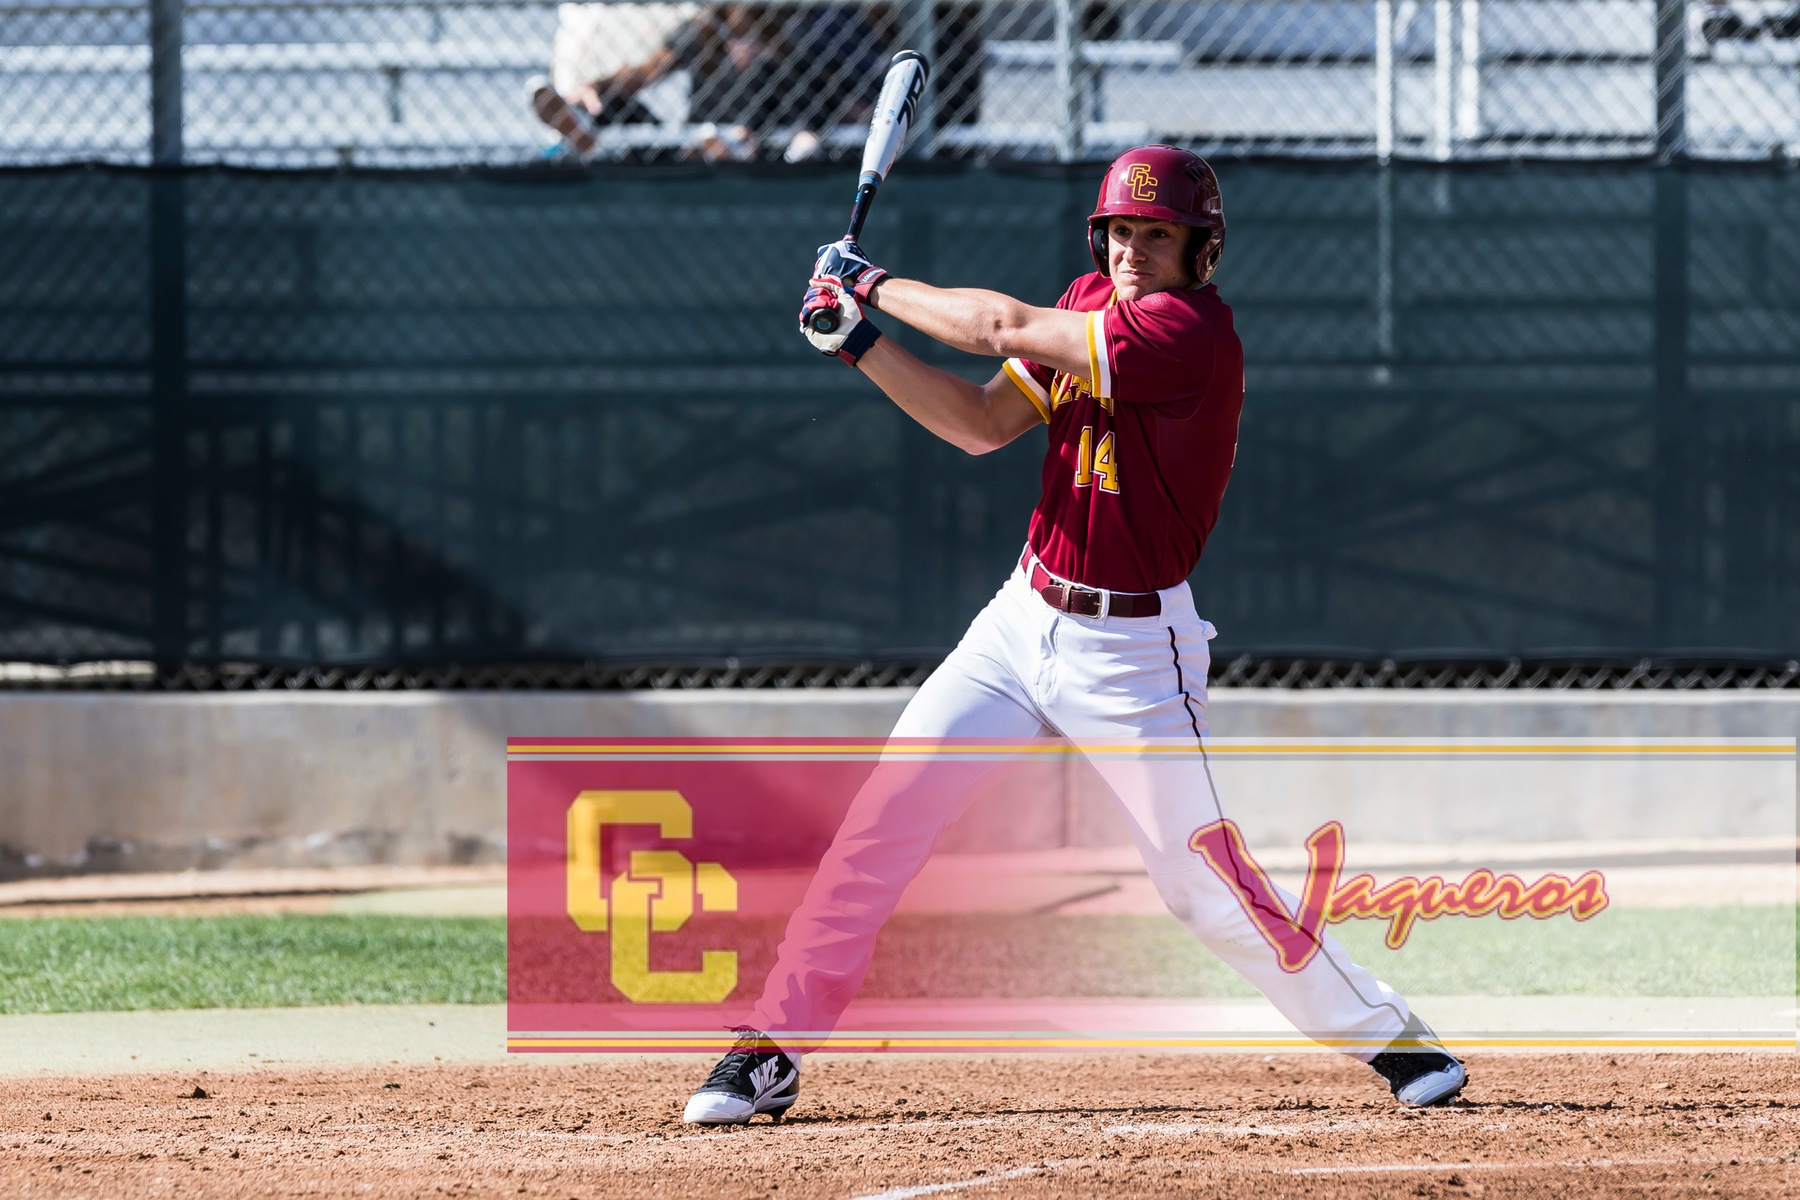 Troy Viola & Tom Tabak notches three hits each in 13-7 GCC win over Victor Valley